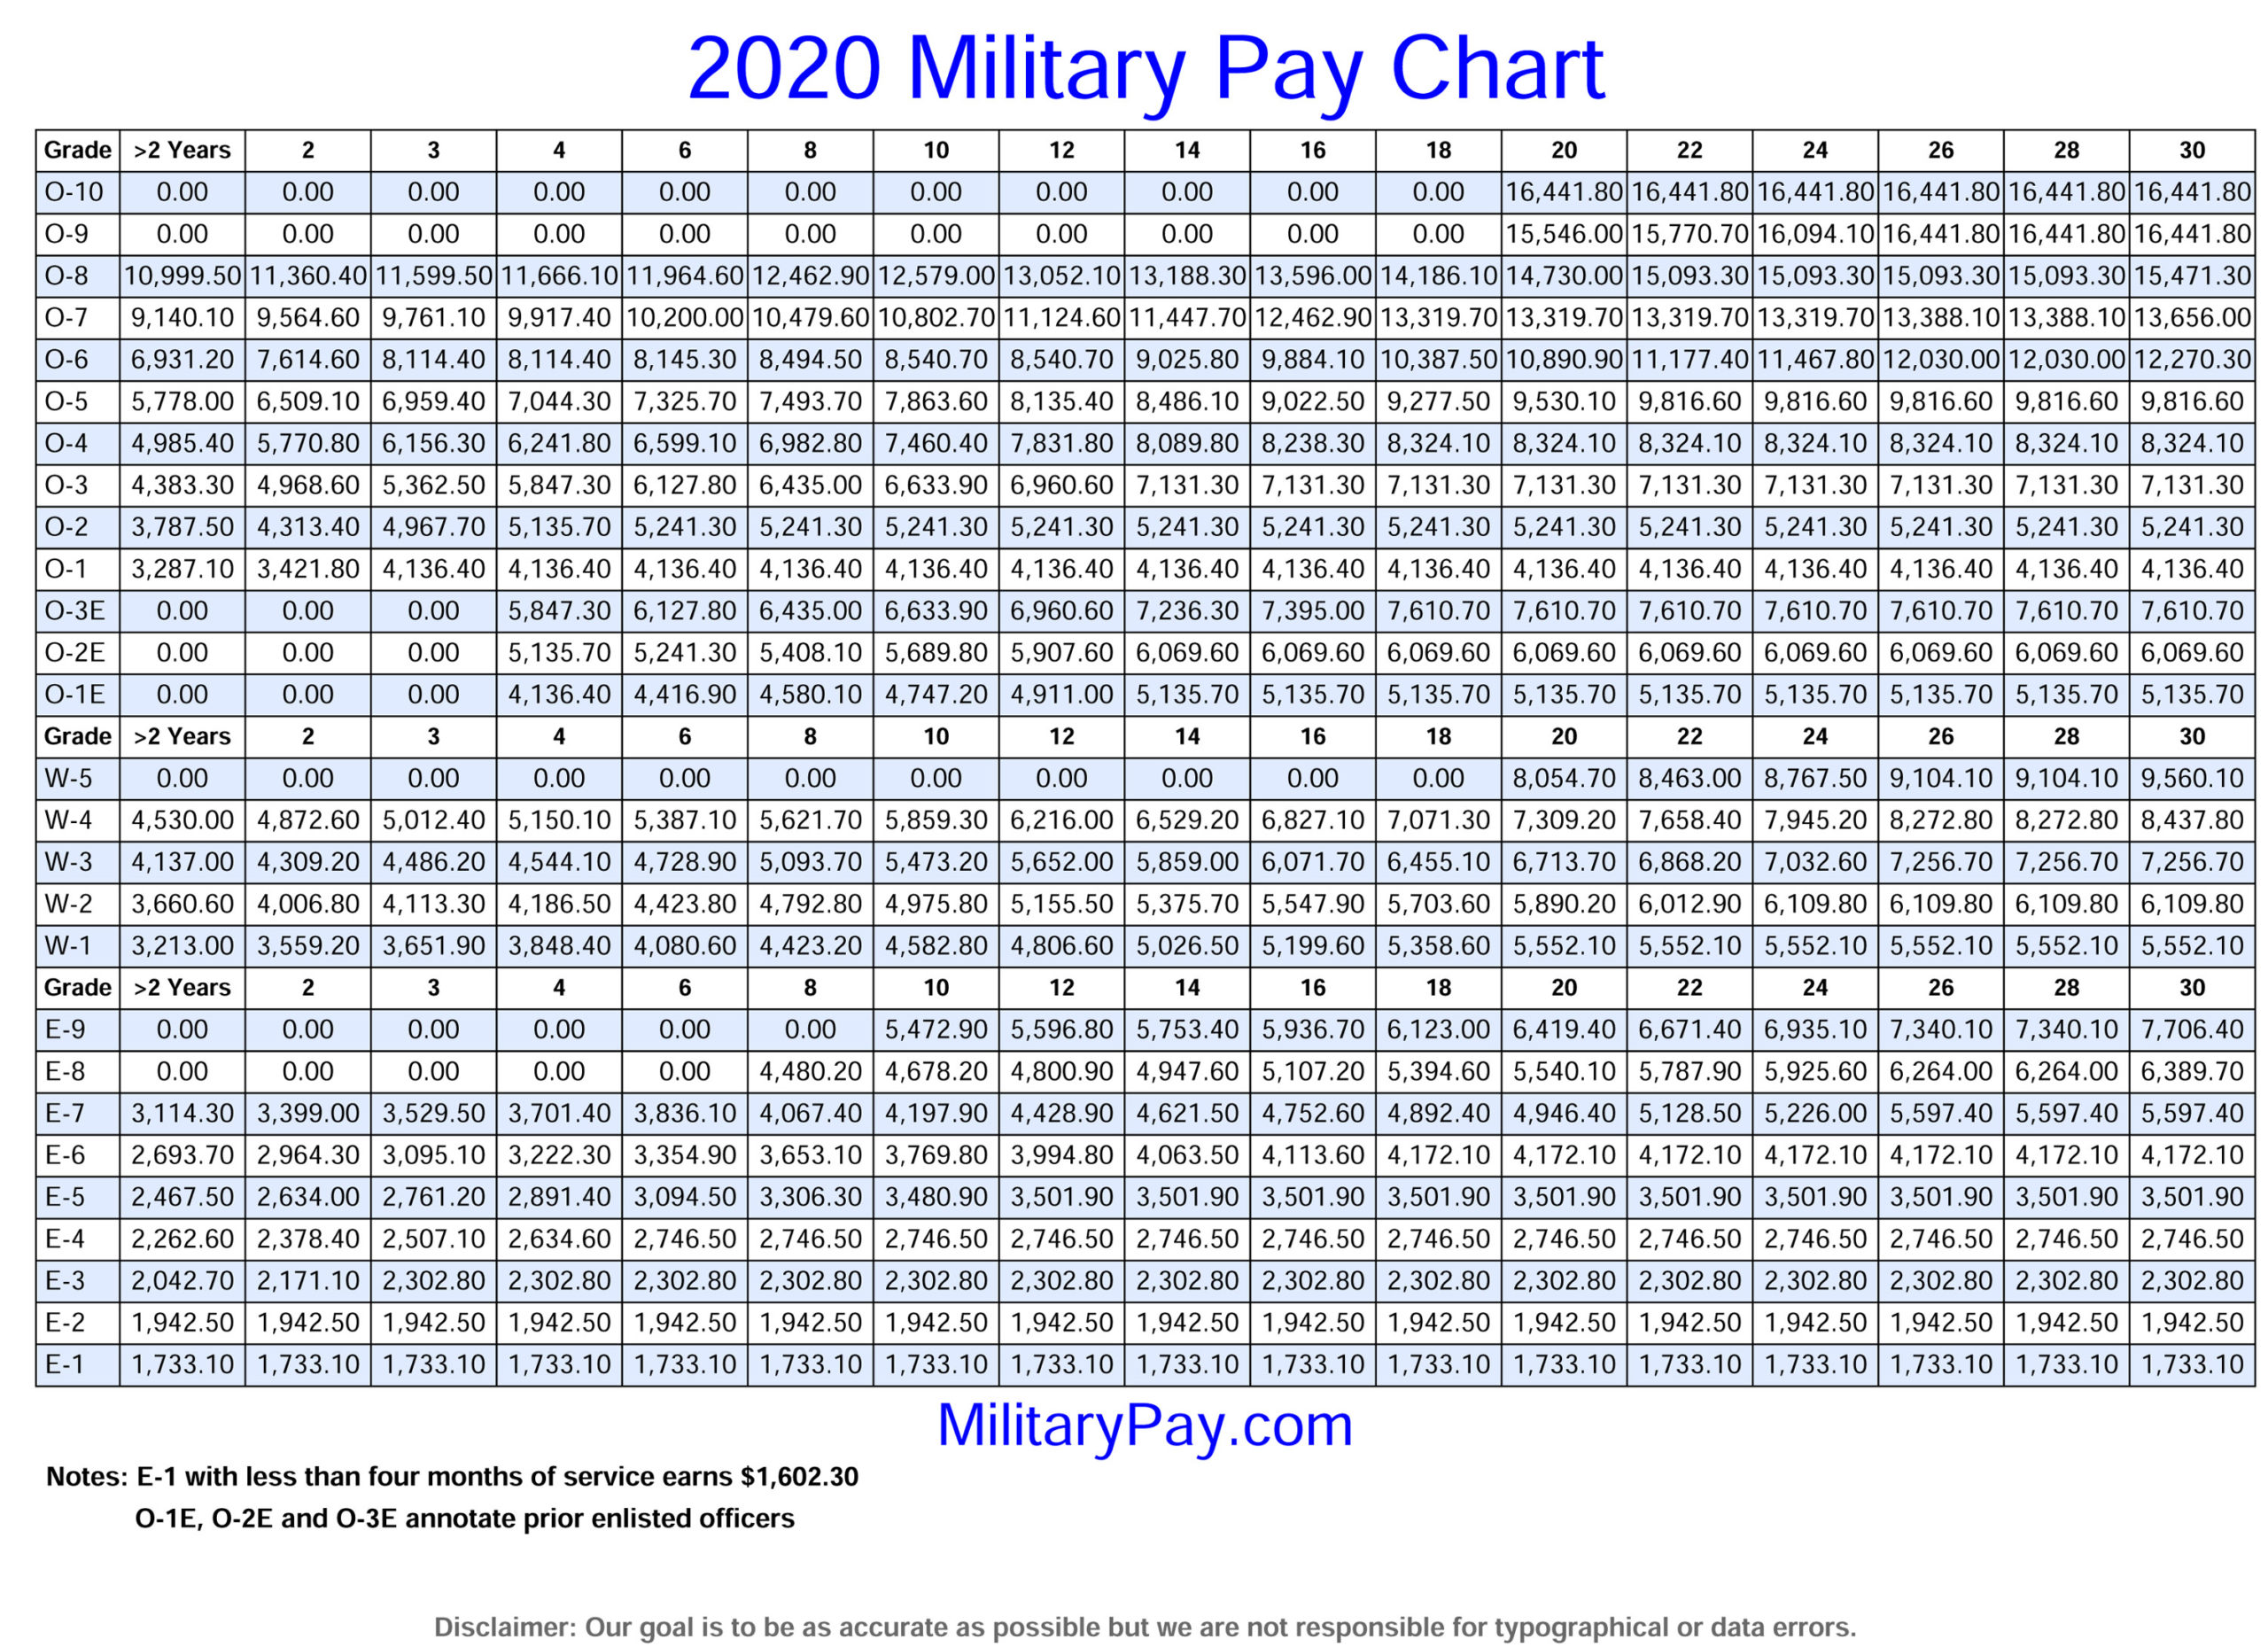 Military Pay Charts | 1949 To 2020 Plus Estimated To 2050